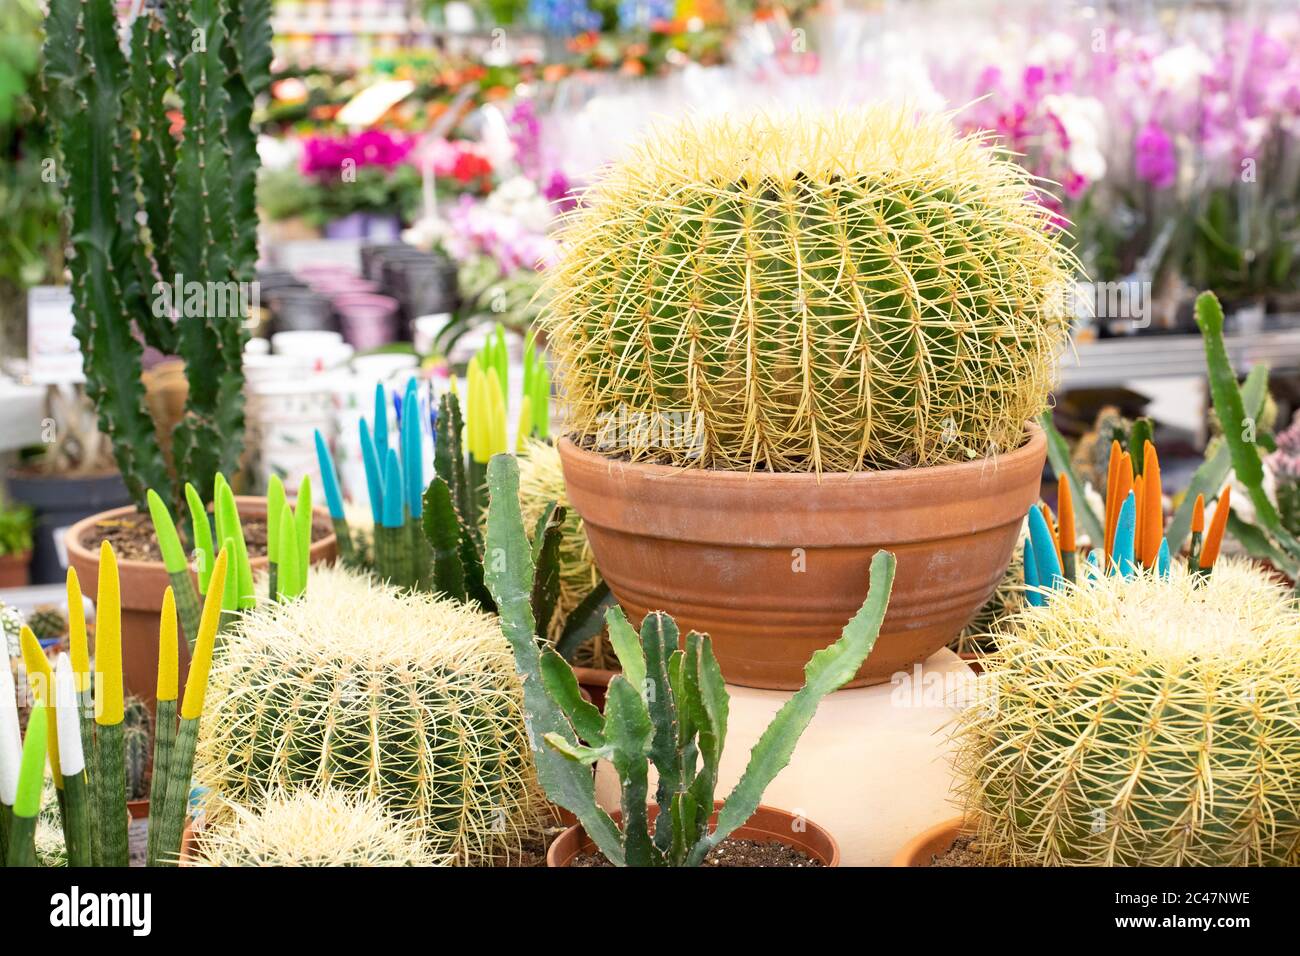 Echinocactus cactus in a clay pot among other varieties of cacti and succulents. Cactus with thick yellow spikes needles on geometric ribs, natural de Stock Photo